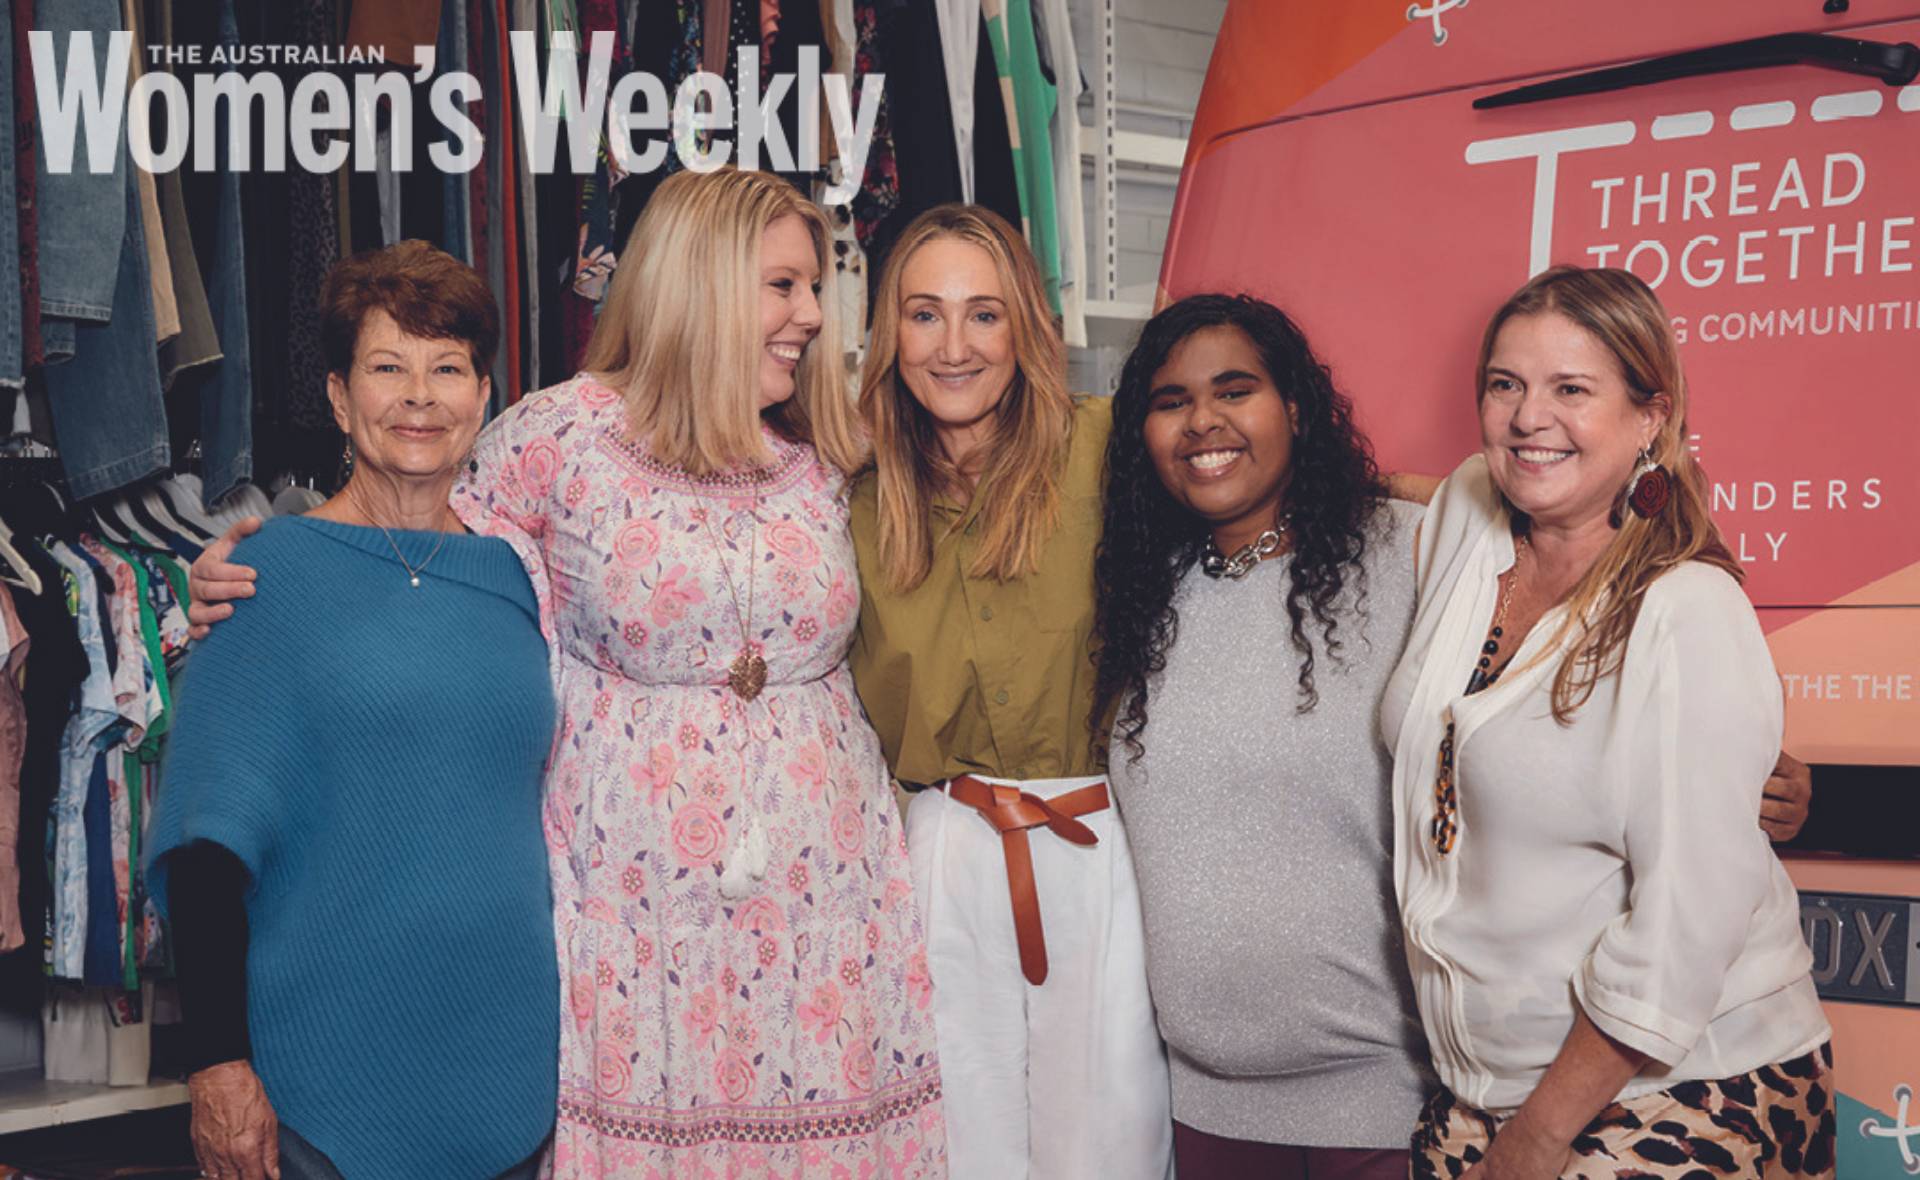 Meet the incredible women whose lives have been changed by Thread Together – a clothing charity helping women in need